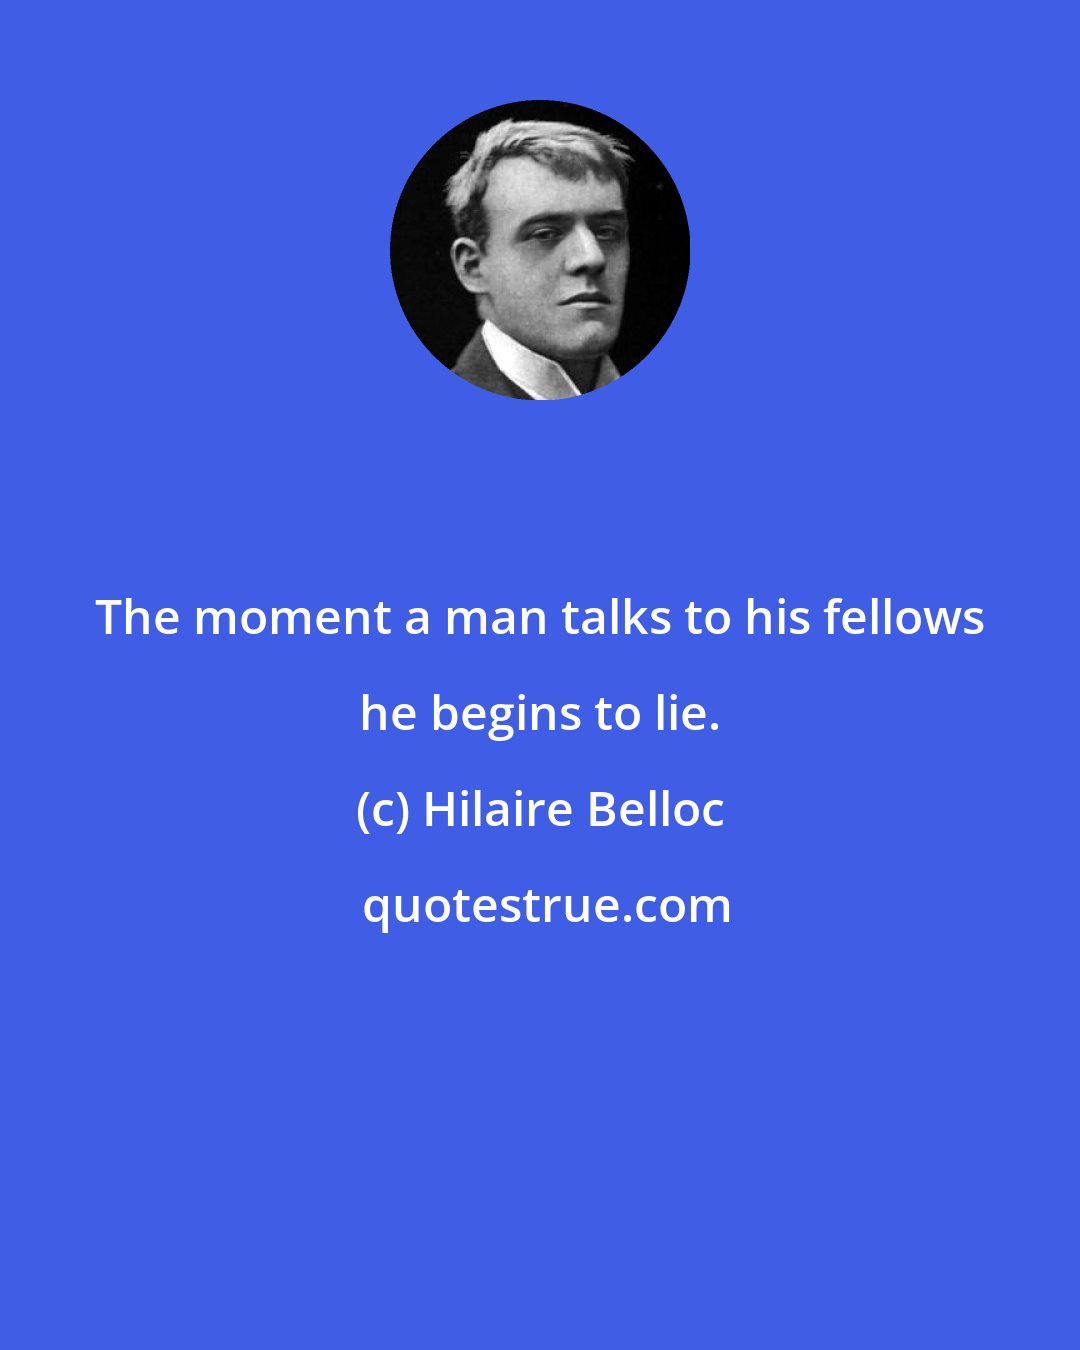 Hilaire Belloc: The moment a man talks to his fellows he begins to lie.